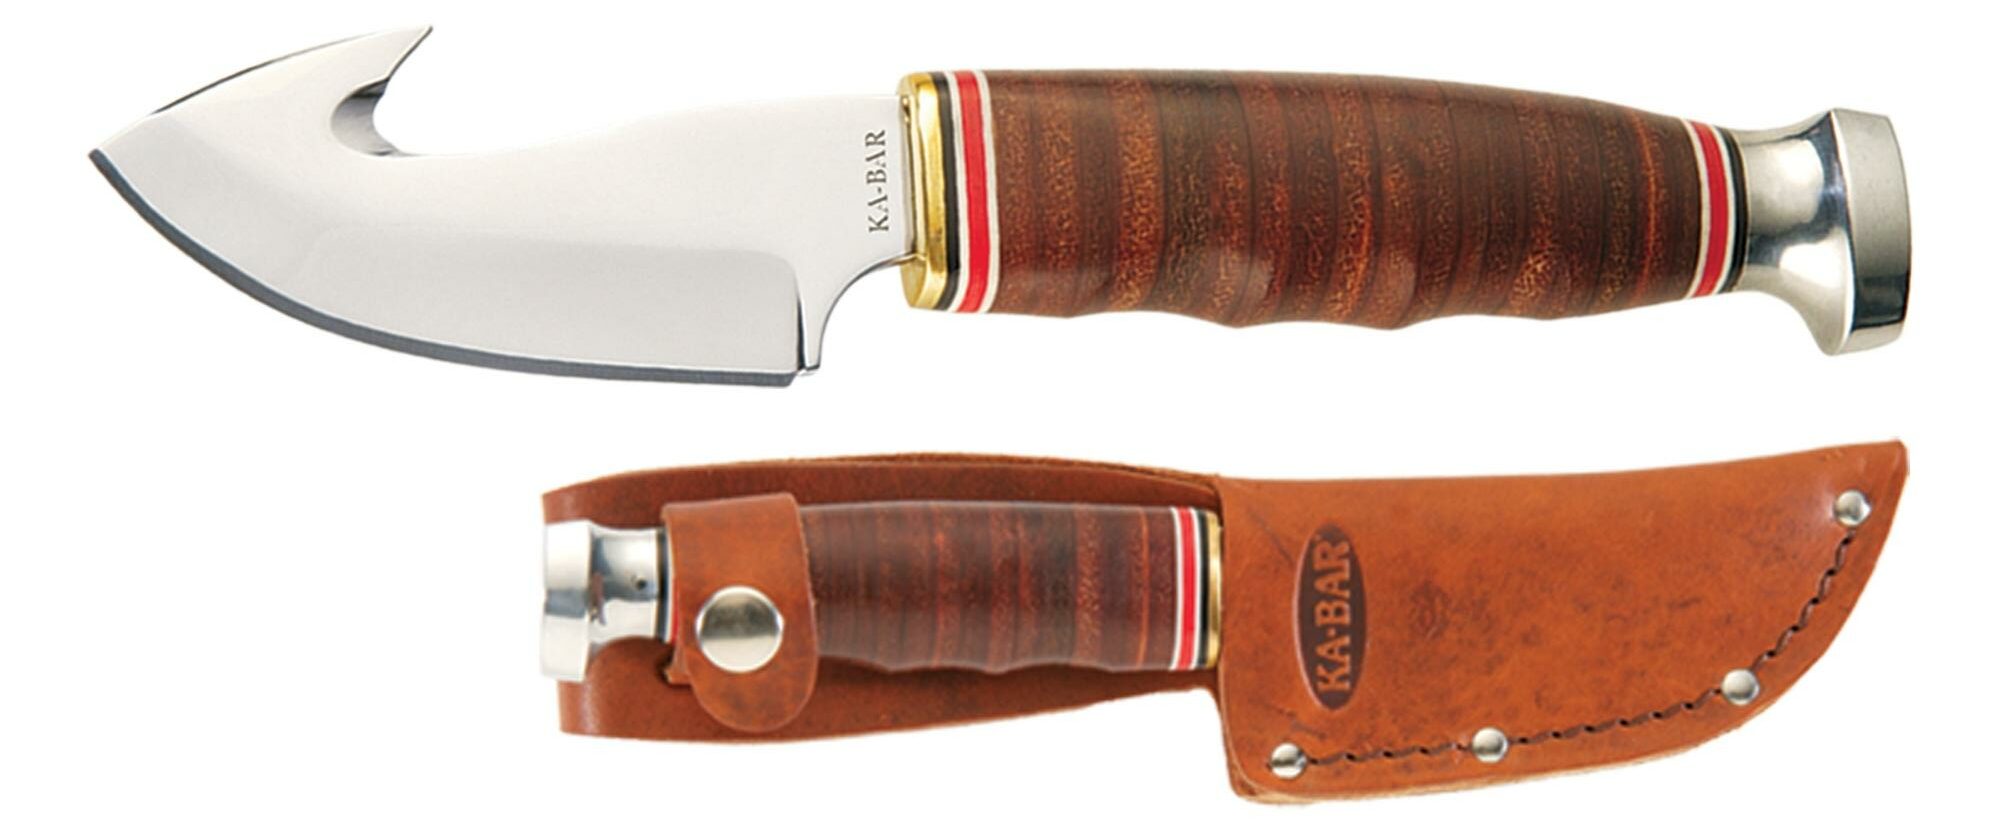 Gut Hook Hunting Knife – the-crowded-kitchen